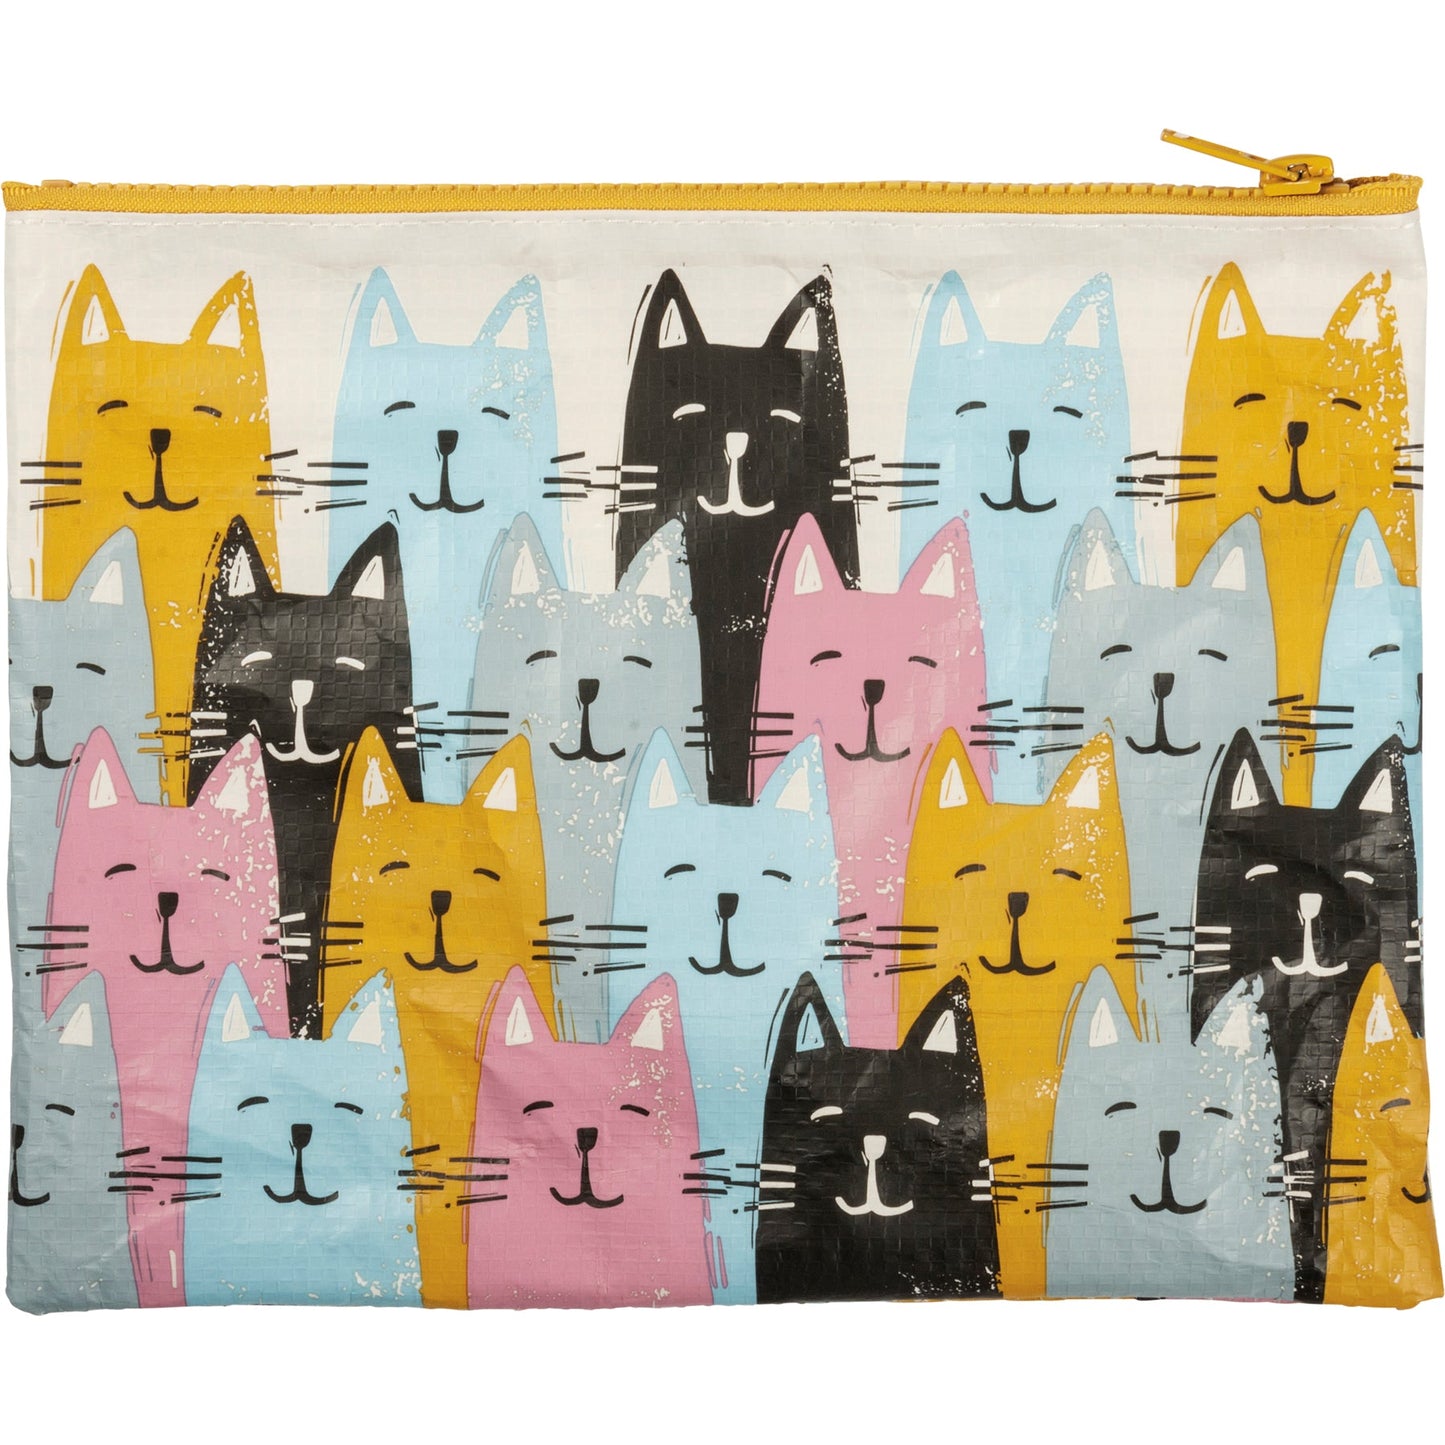 One Cat Away From Crazy Cat Lady Zipper Pouch